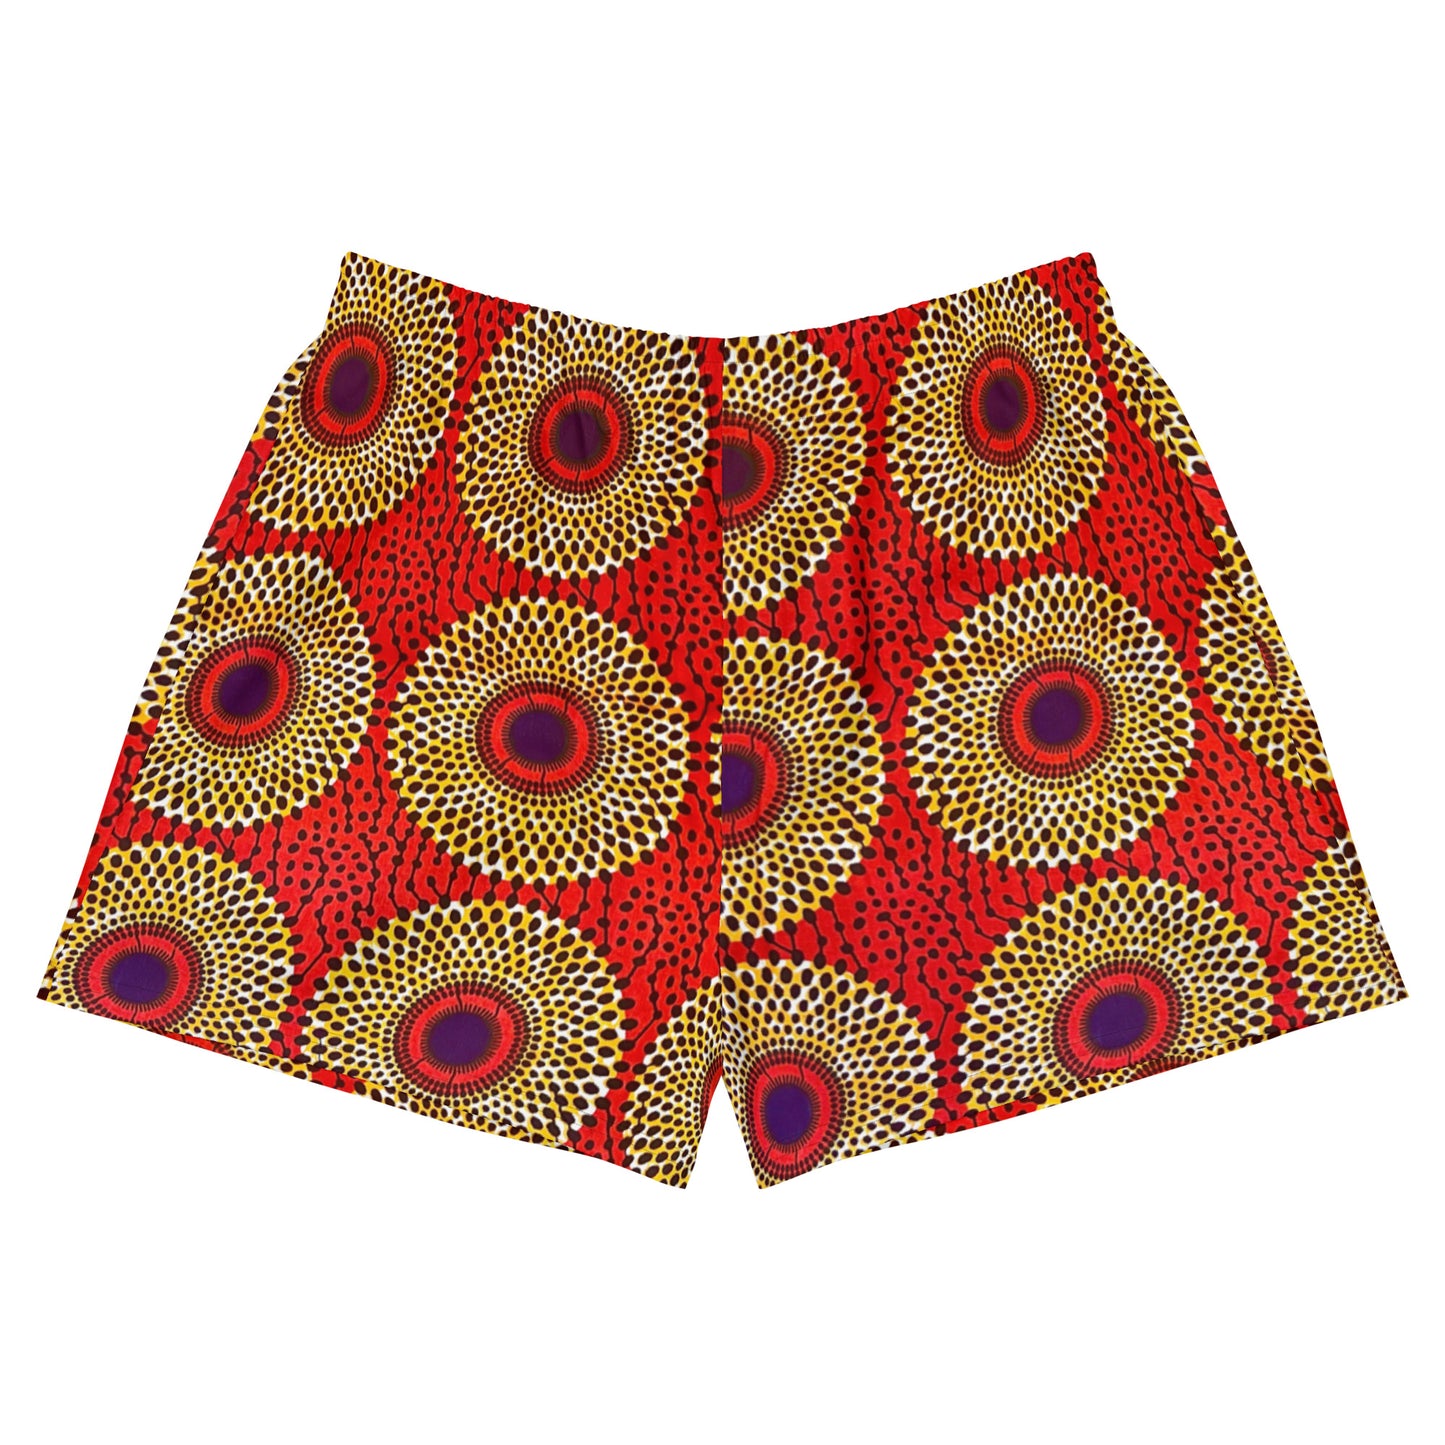 Rekiana African Print Women’s Recycled Athletic Shorts